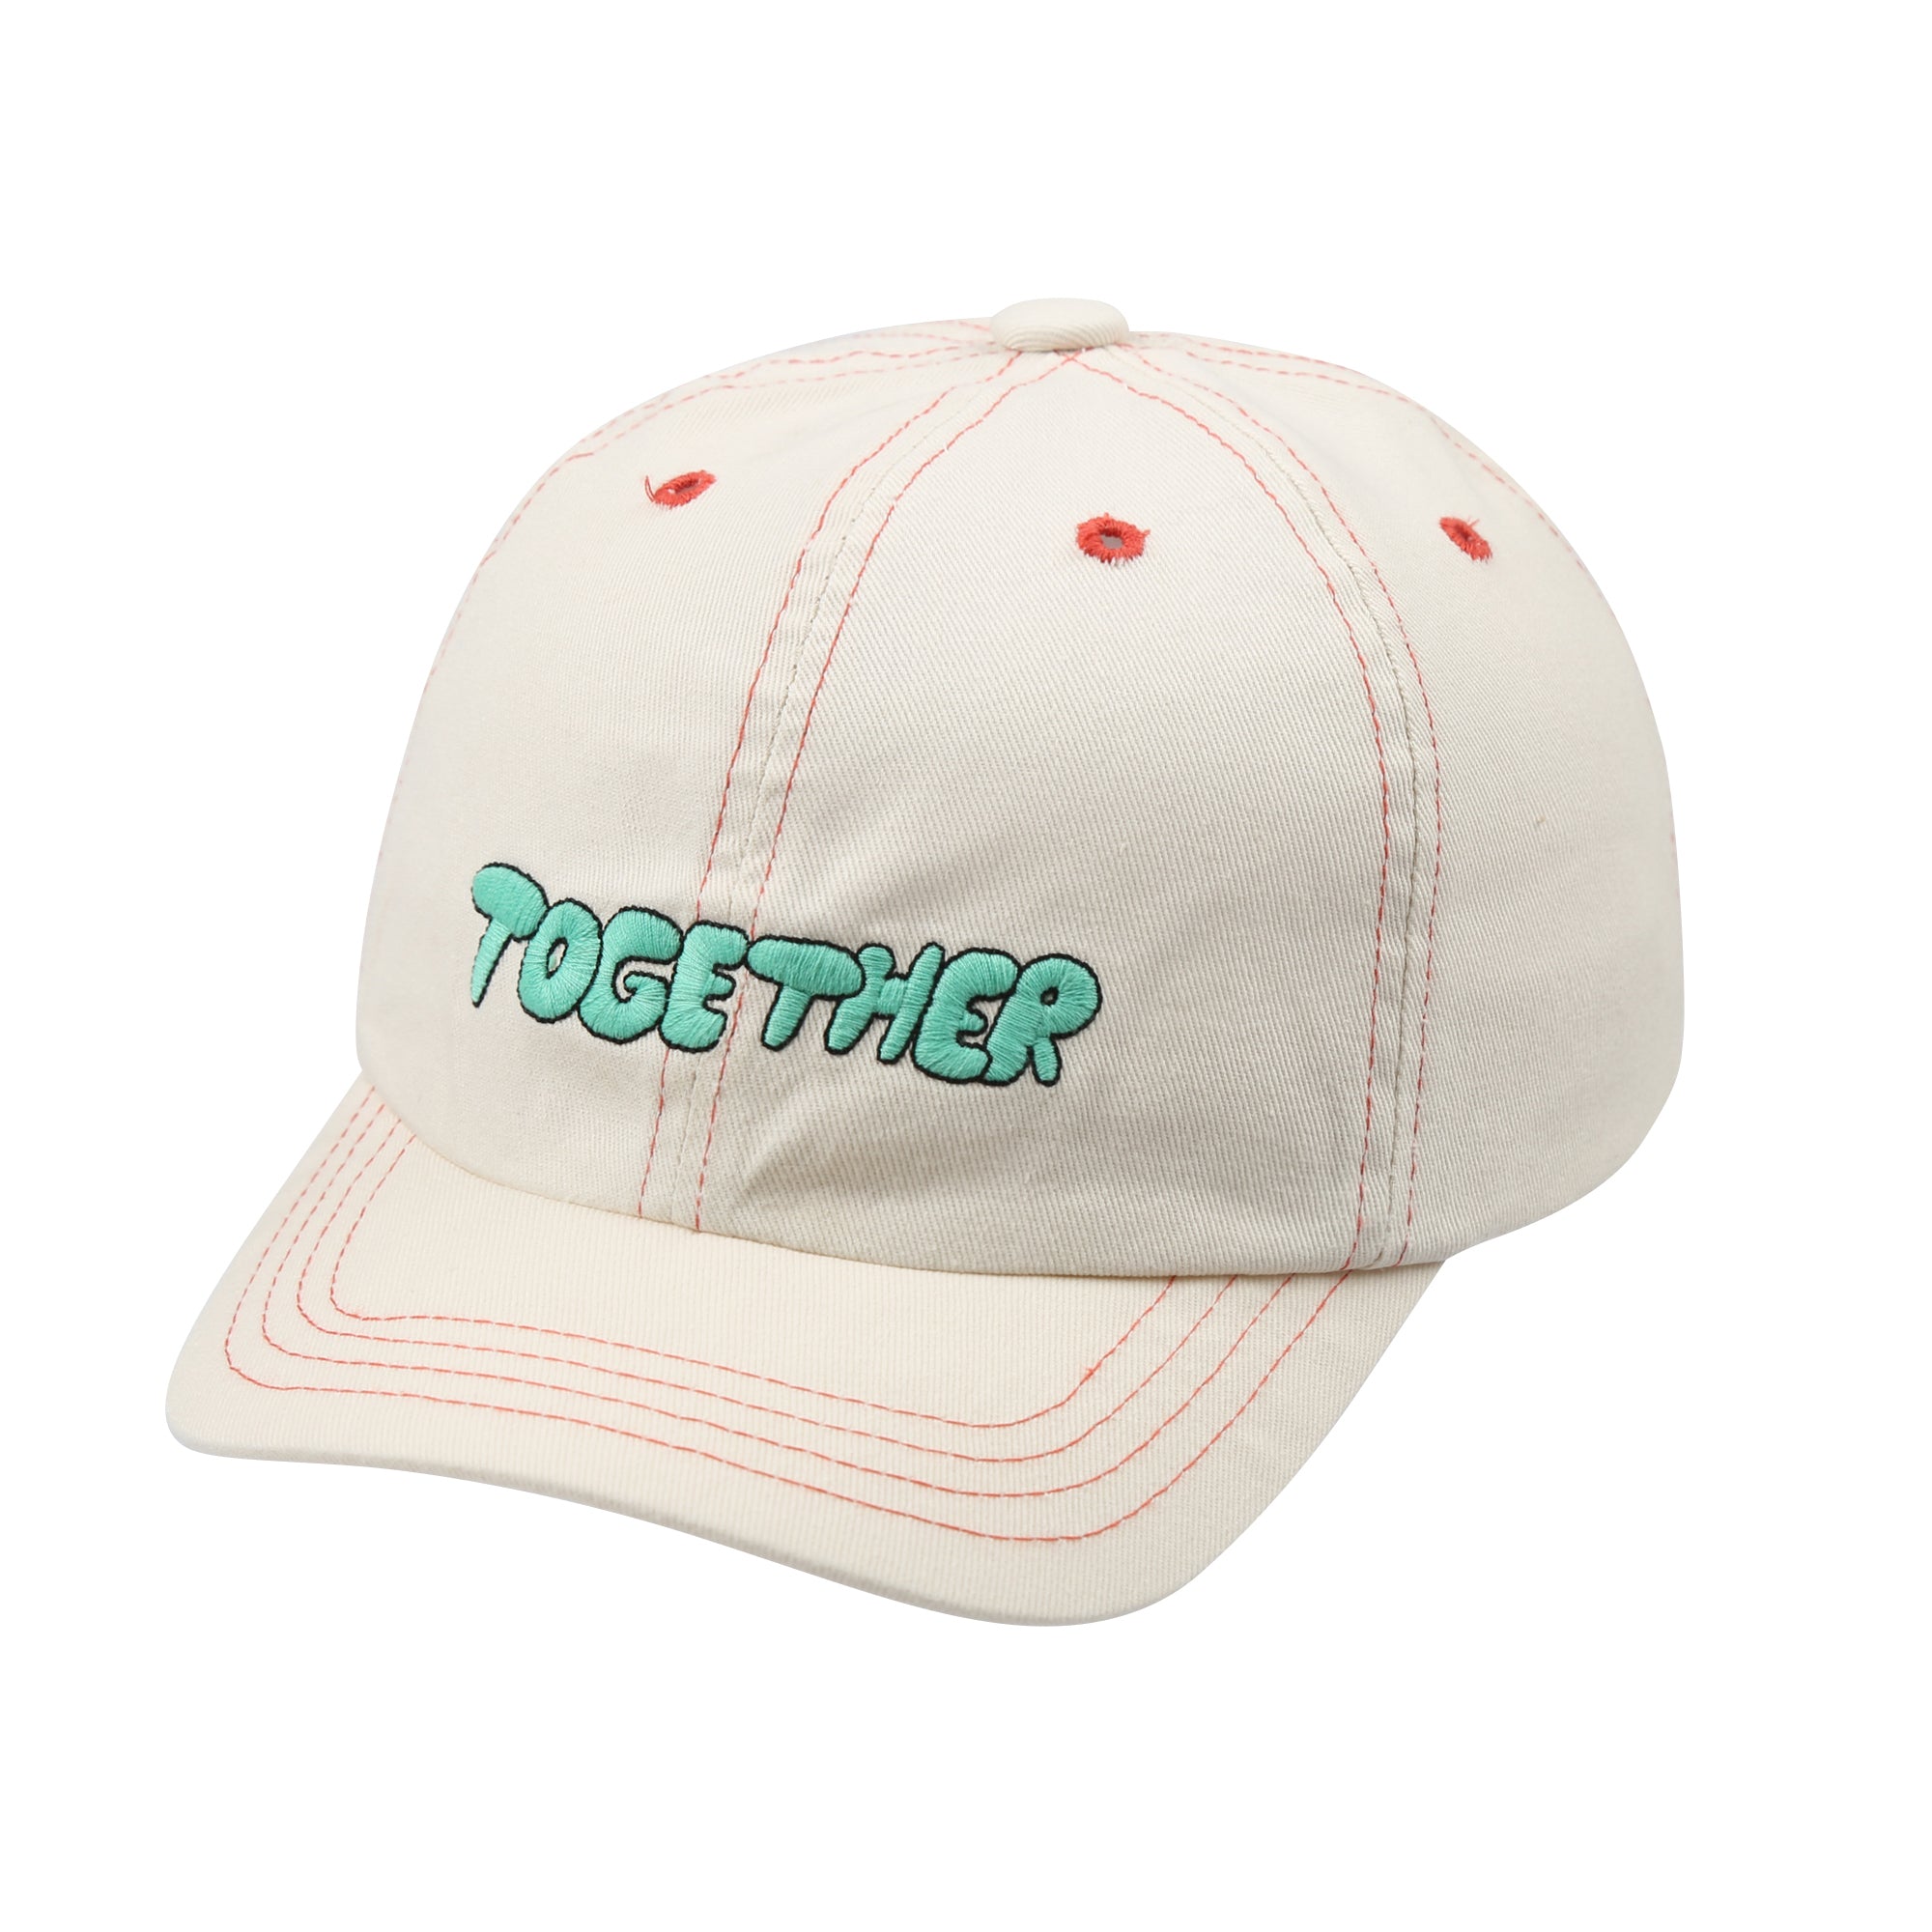 Together Ball Cap-IVORY